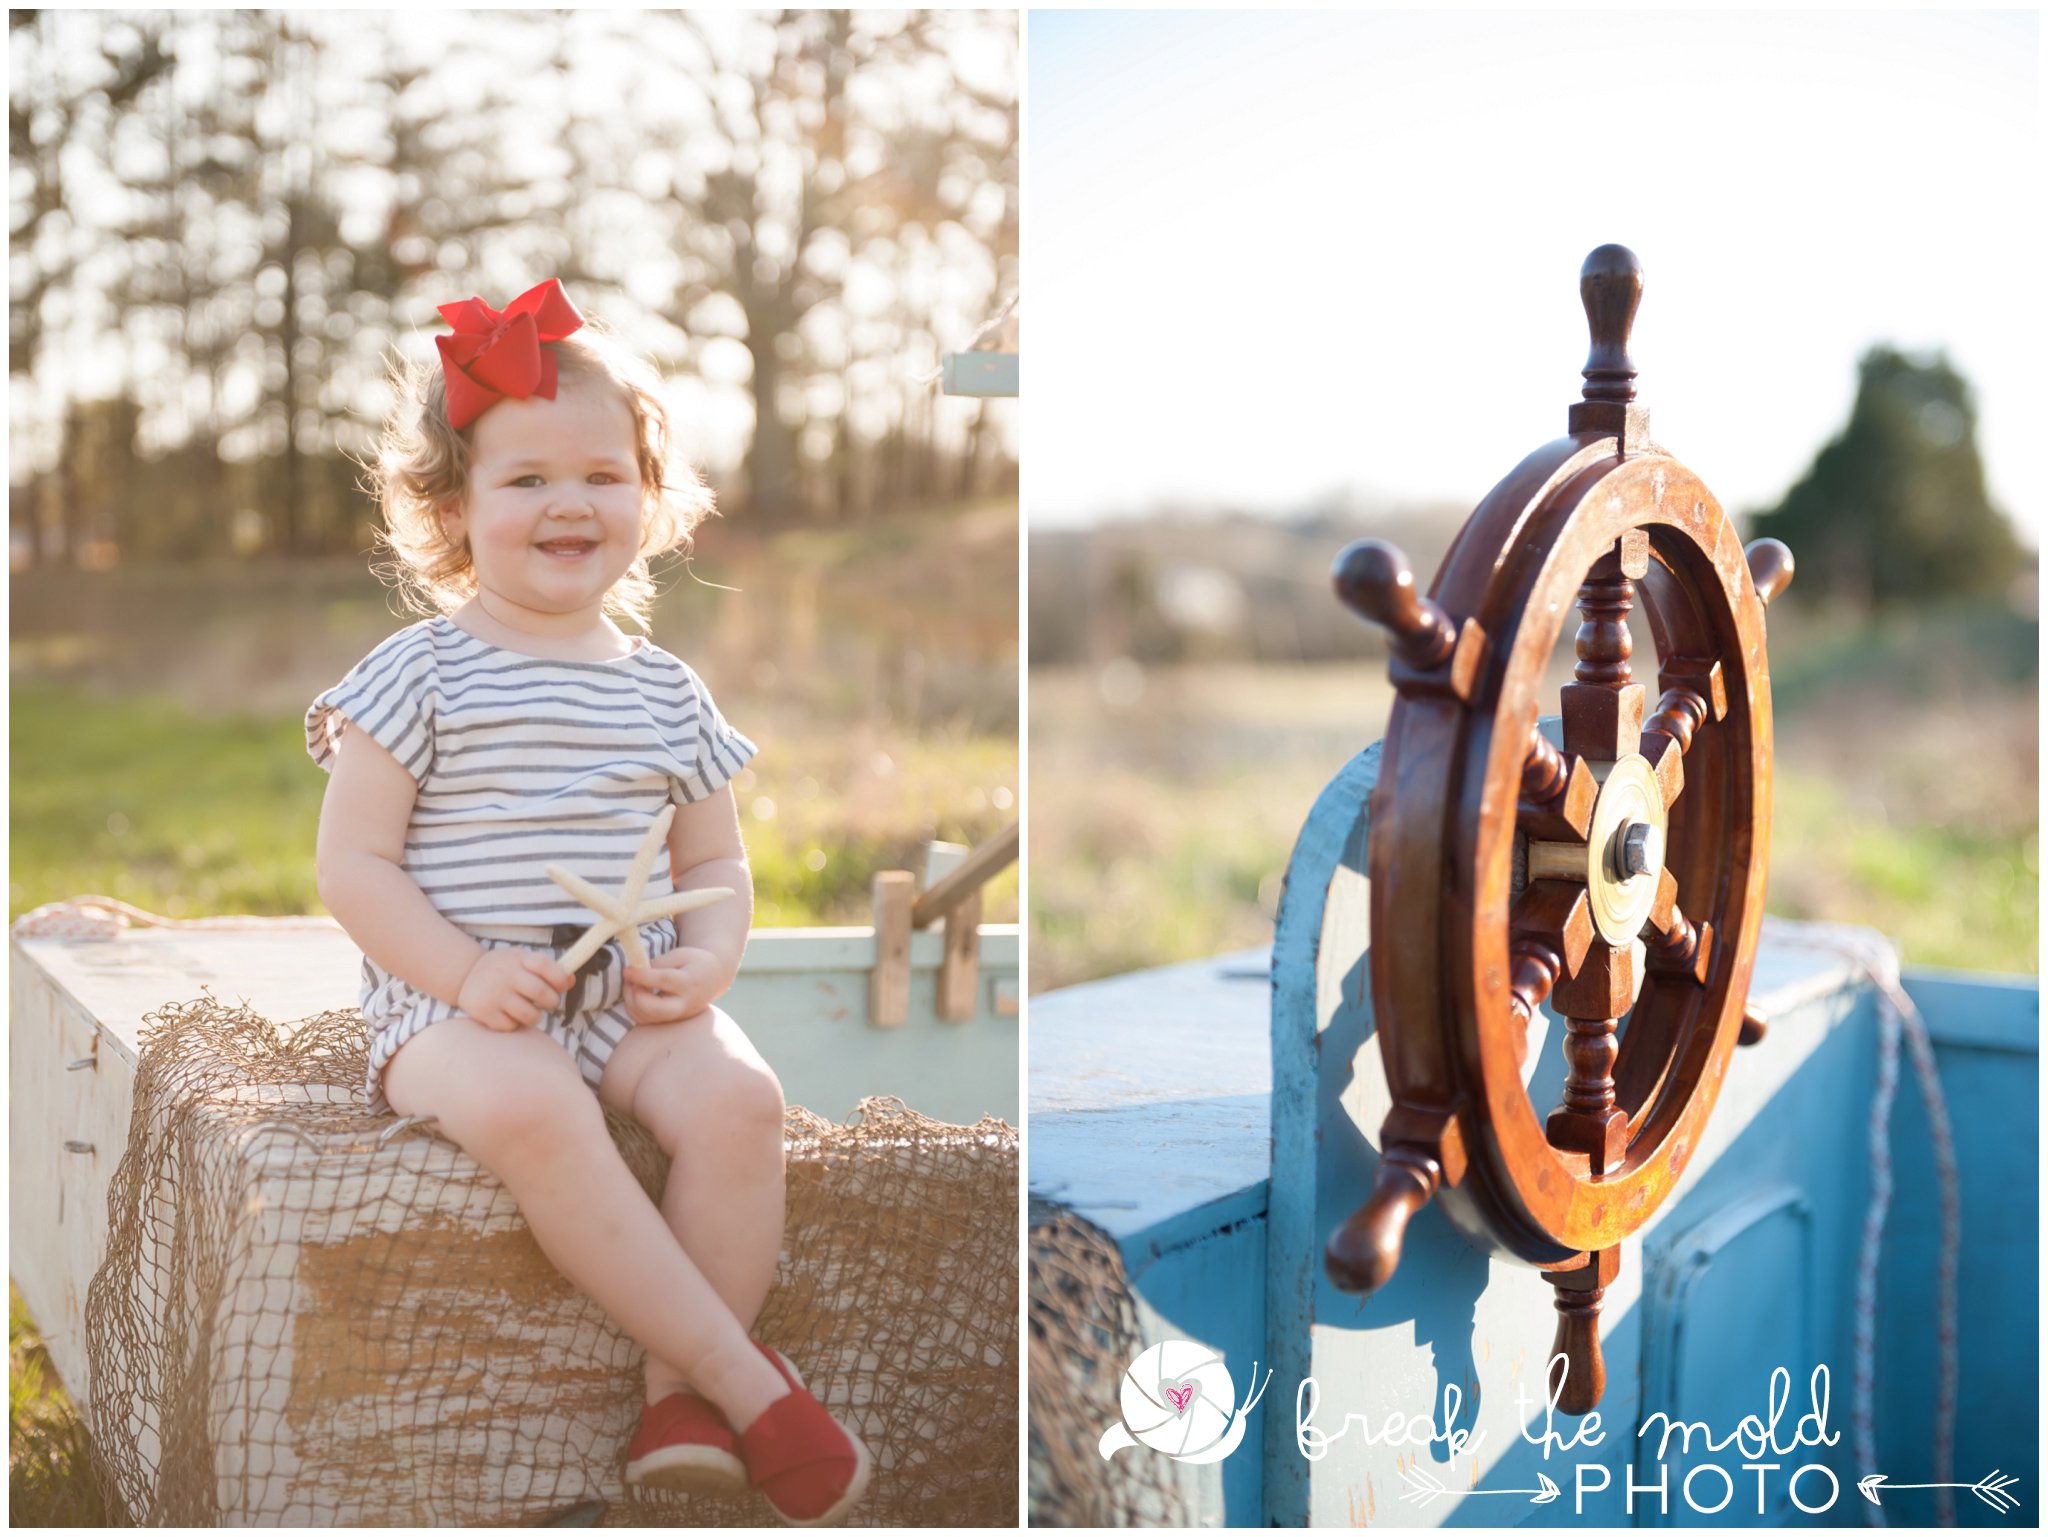 break-the-mold-photo-nautical-themed-mini-sessions-knoxville_3892.jpg